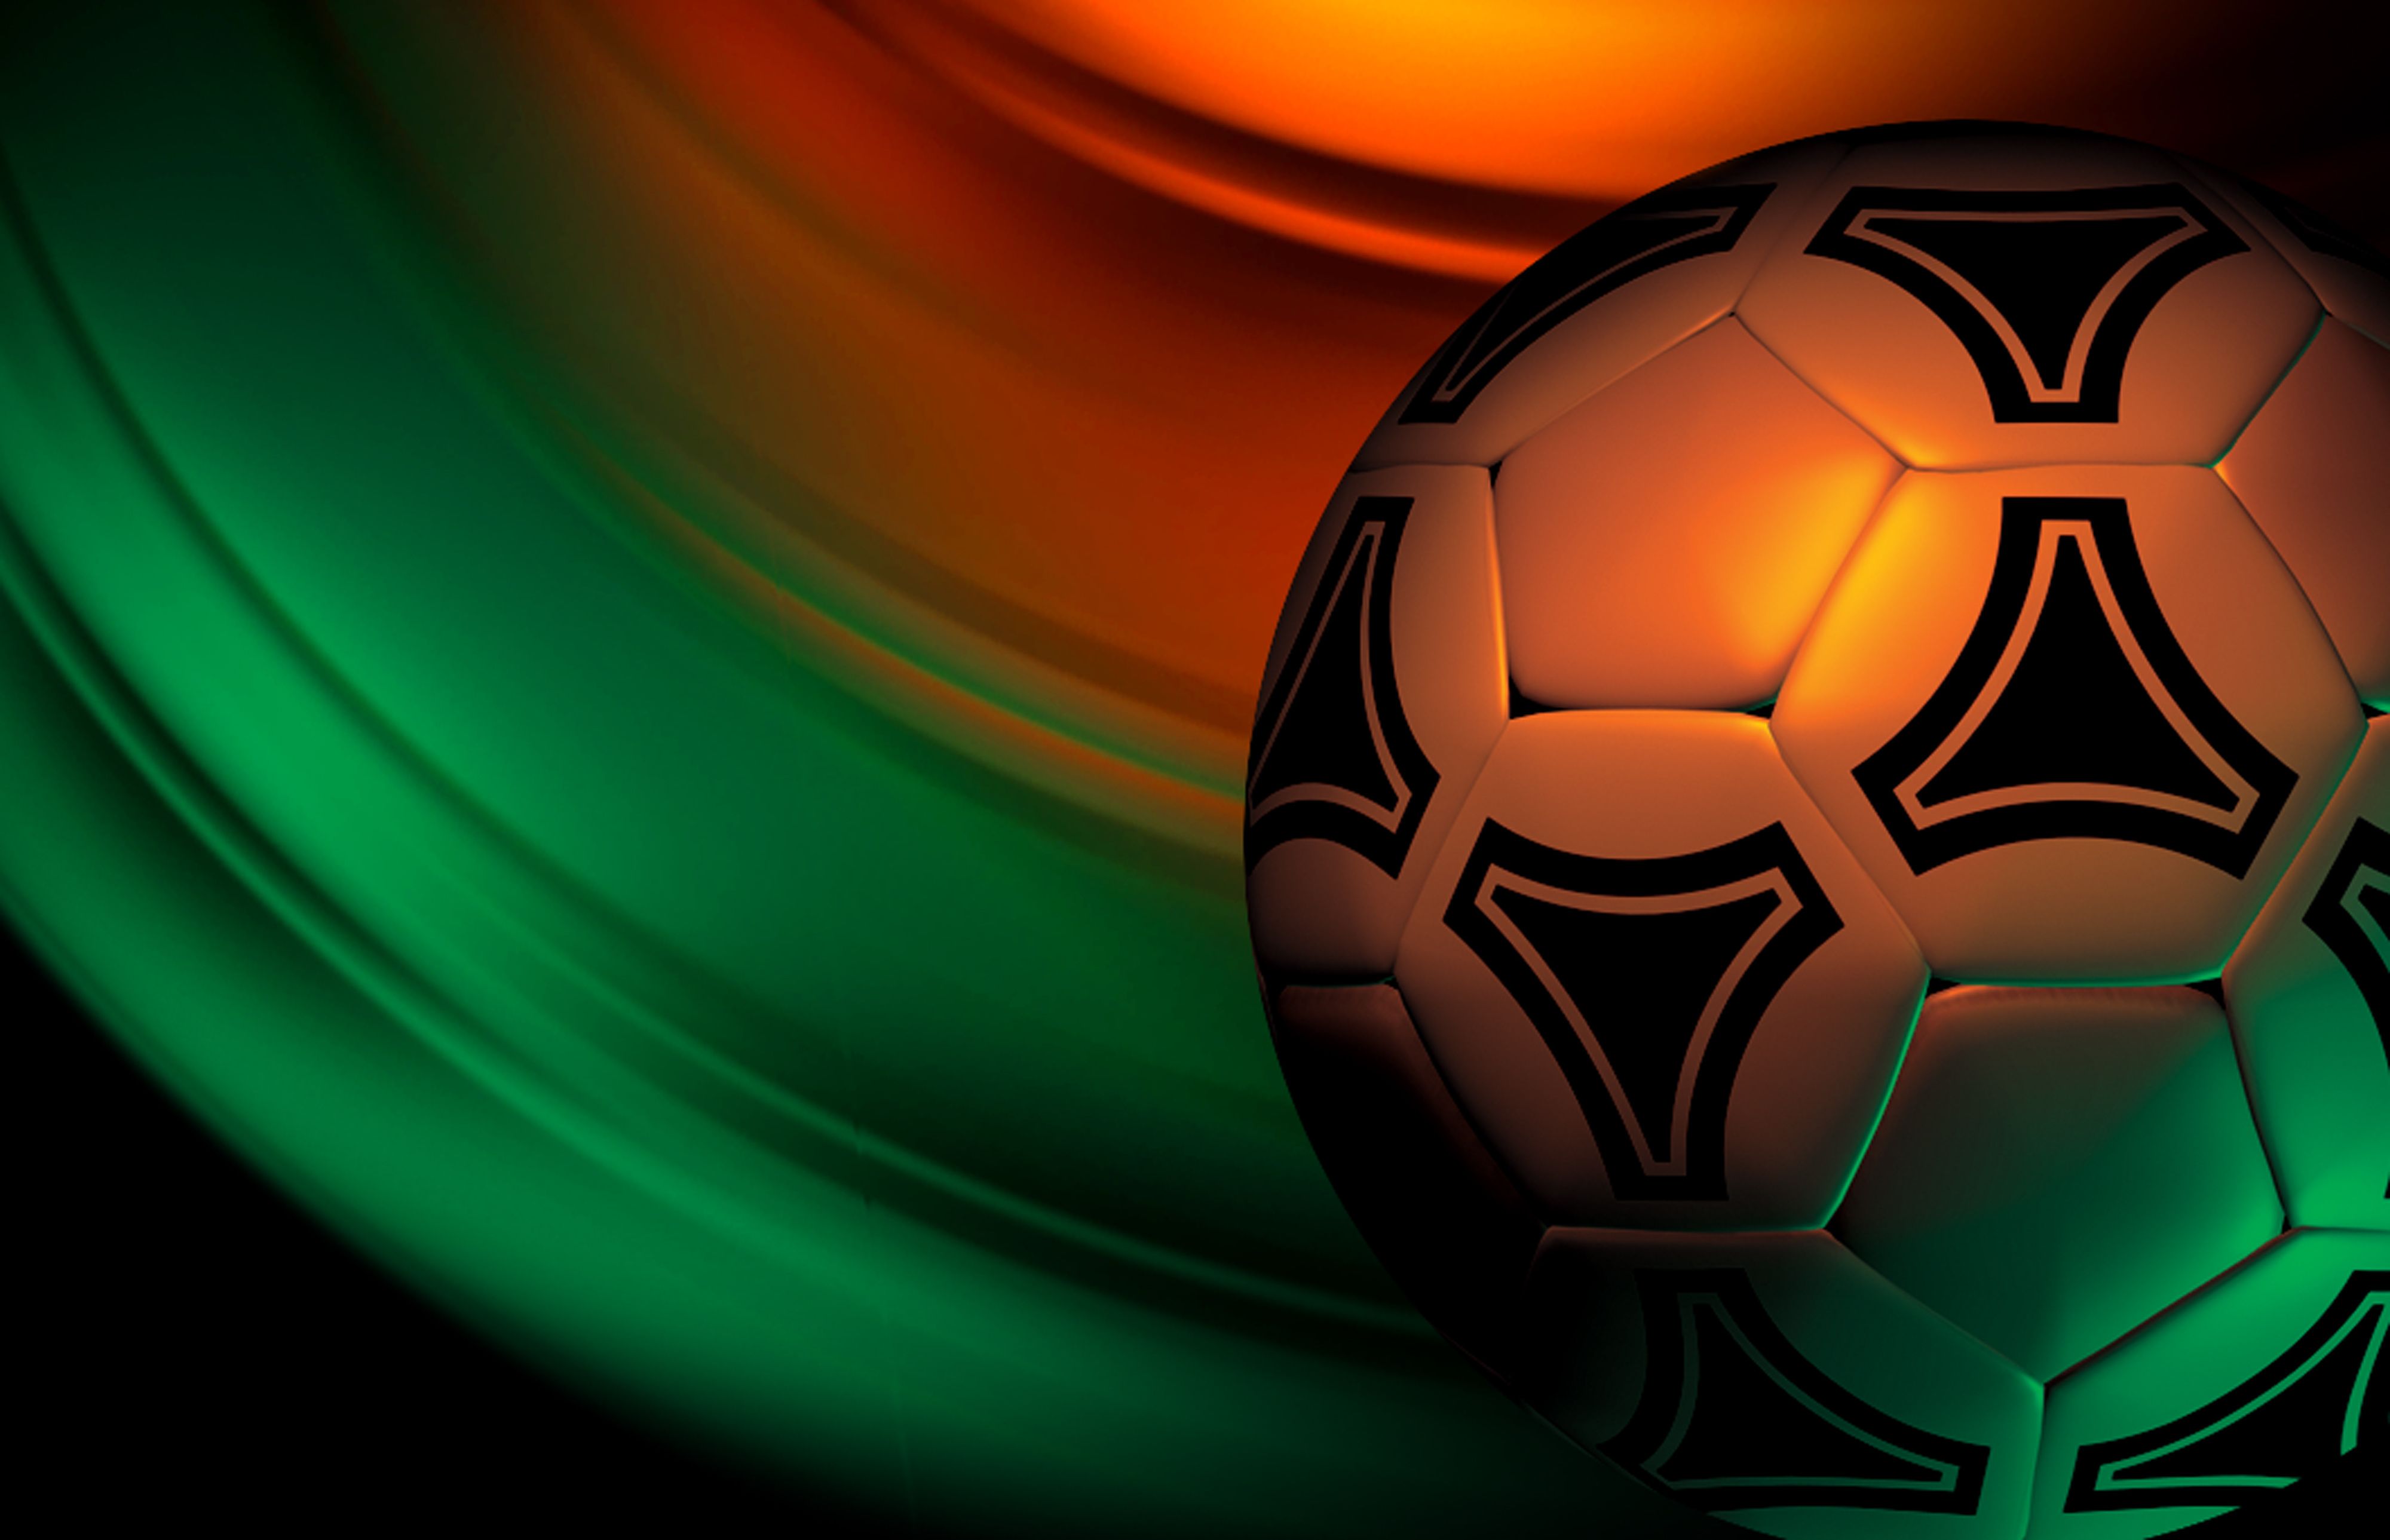 Abstract Soccer Wallpaper Free Abstract Soccer Background